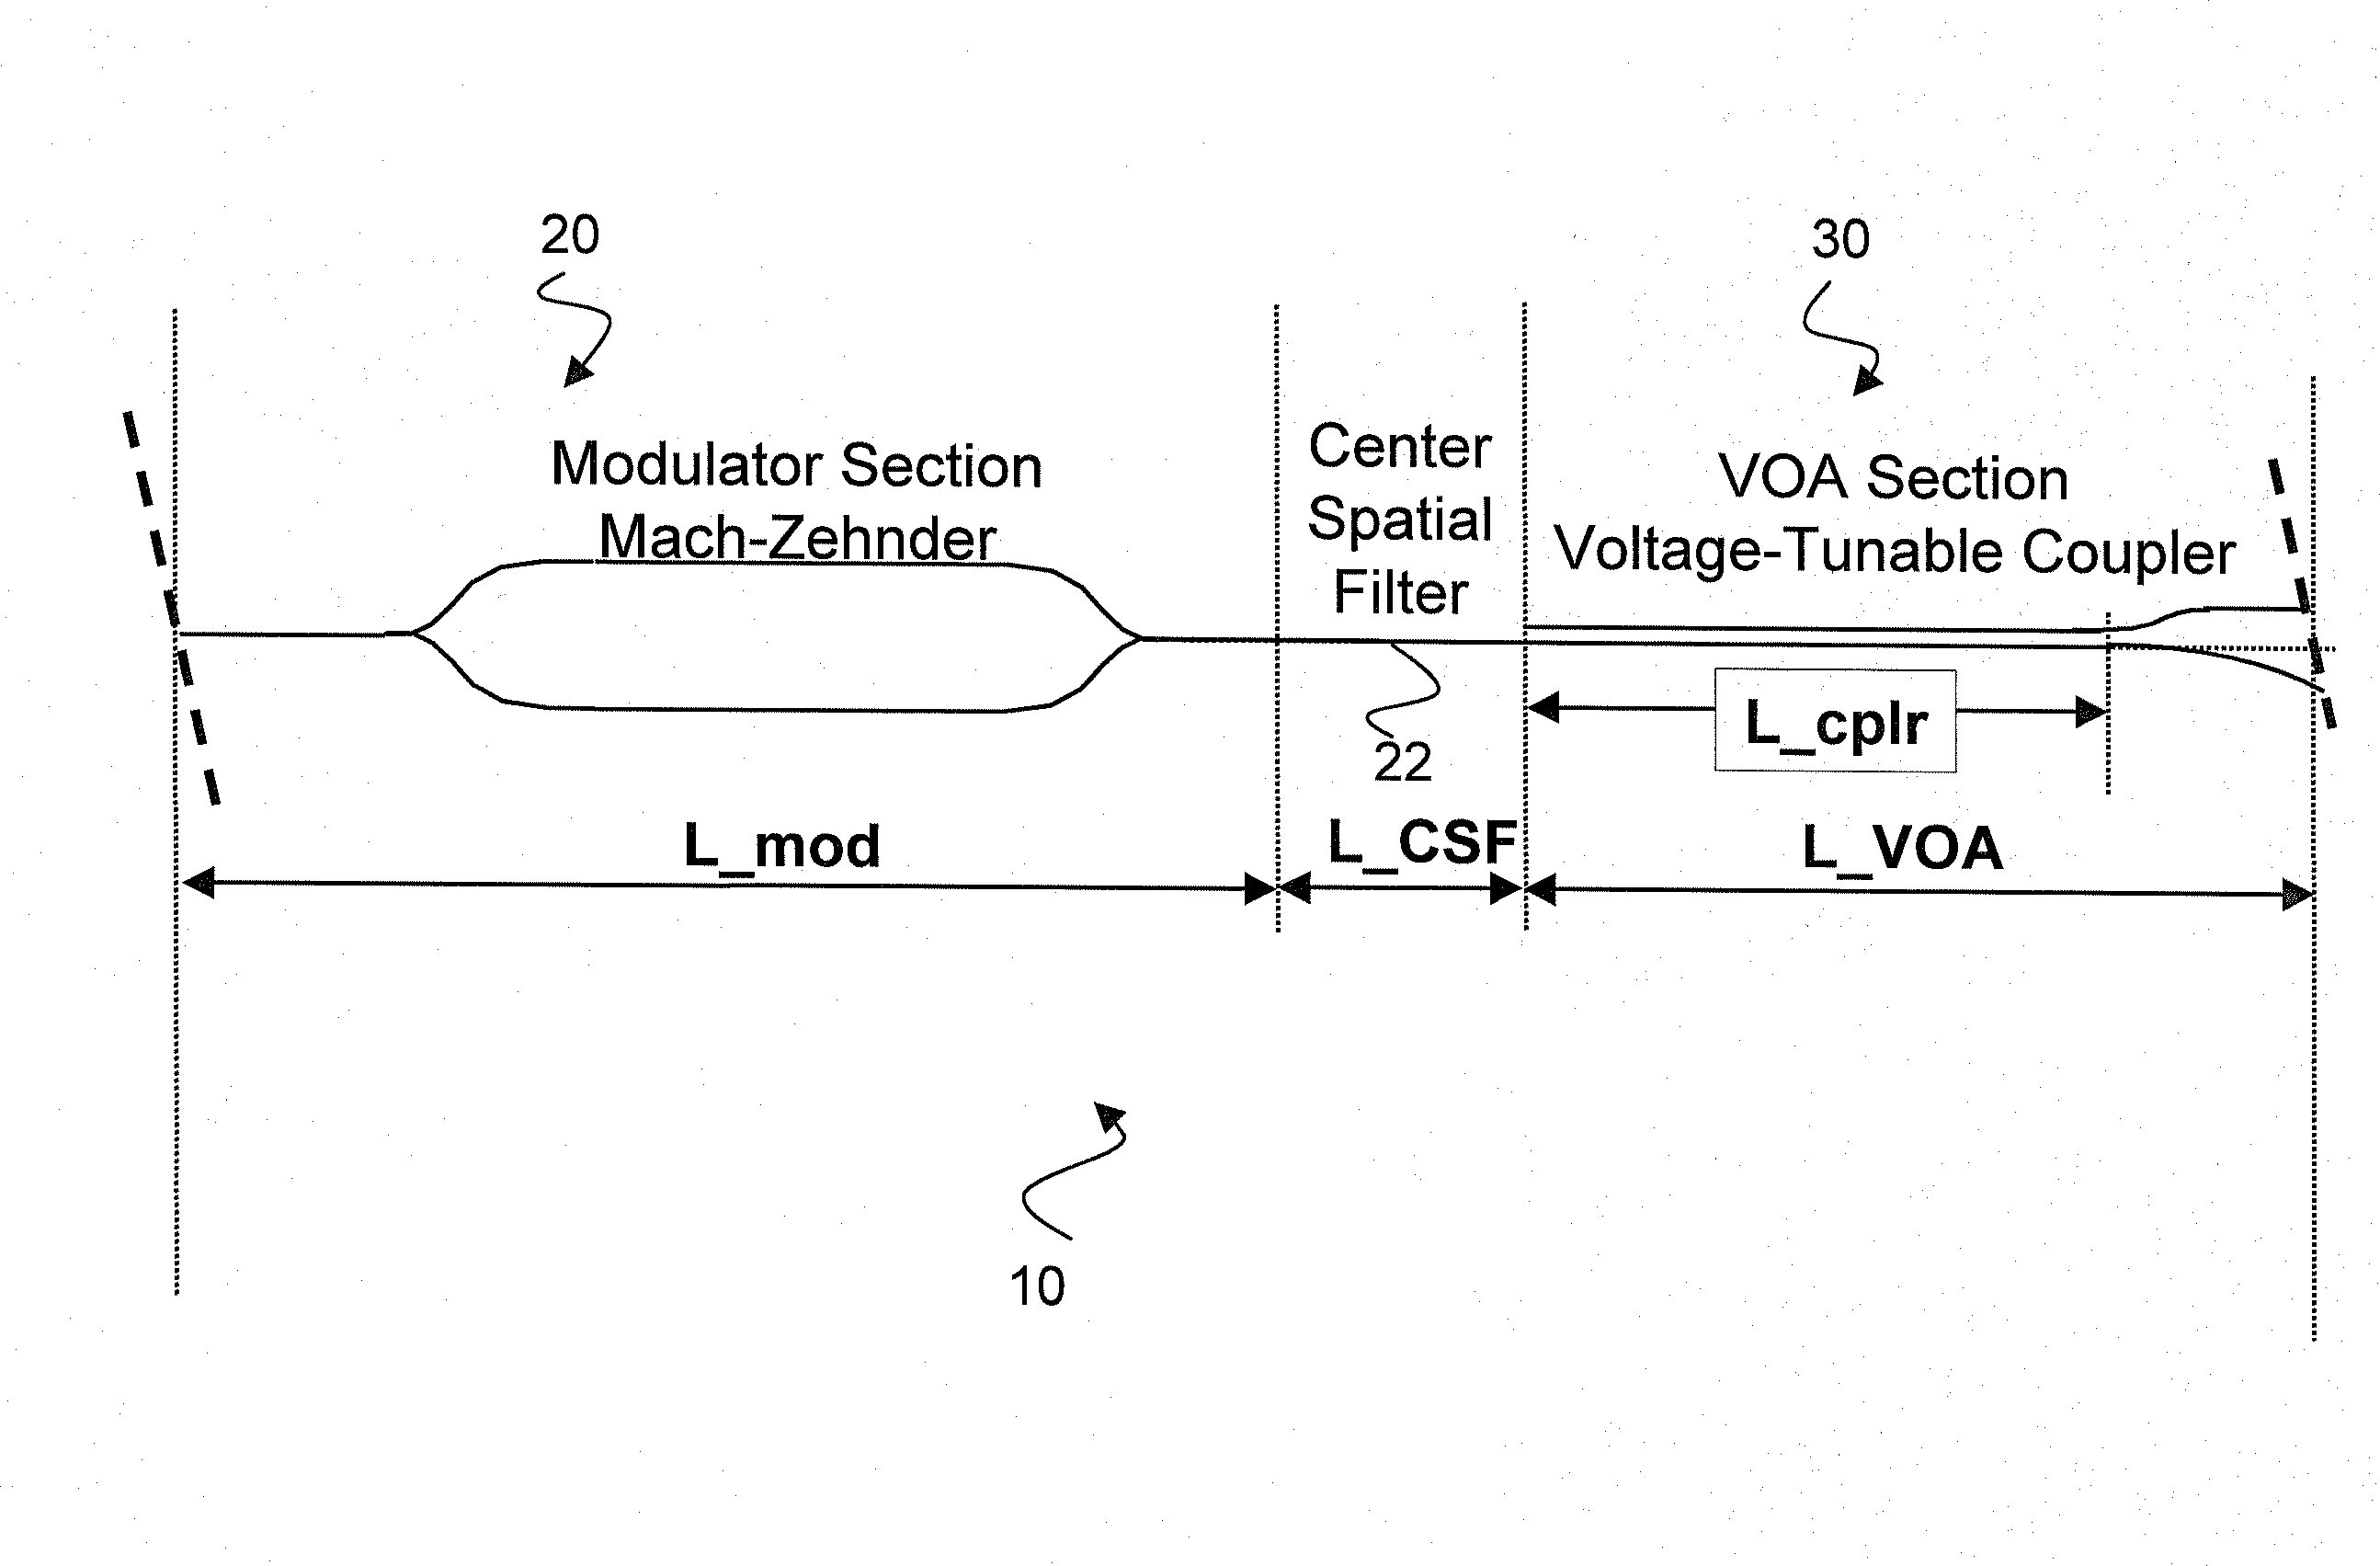 Asymmetric directional coupler having a reduced drive voltage